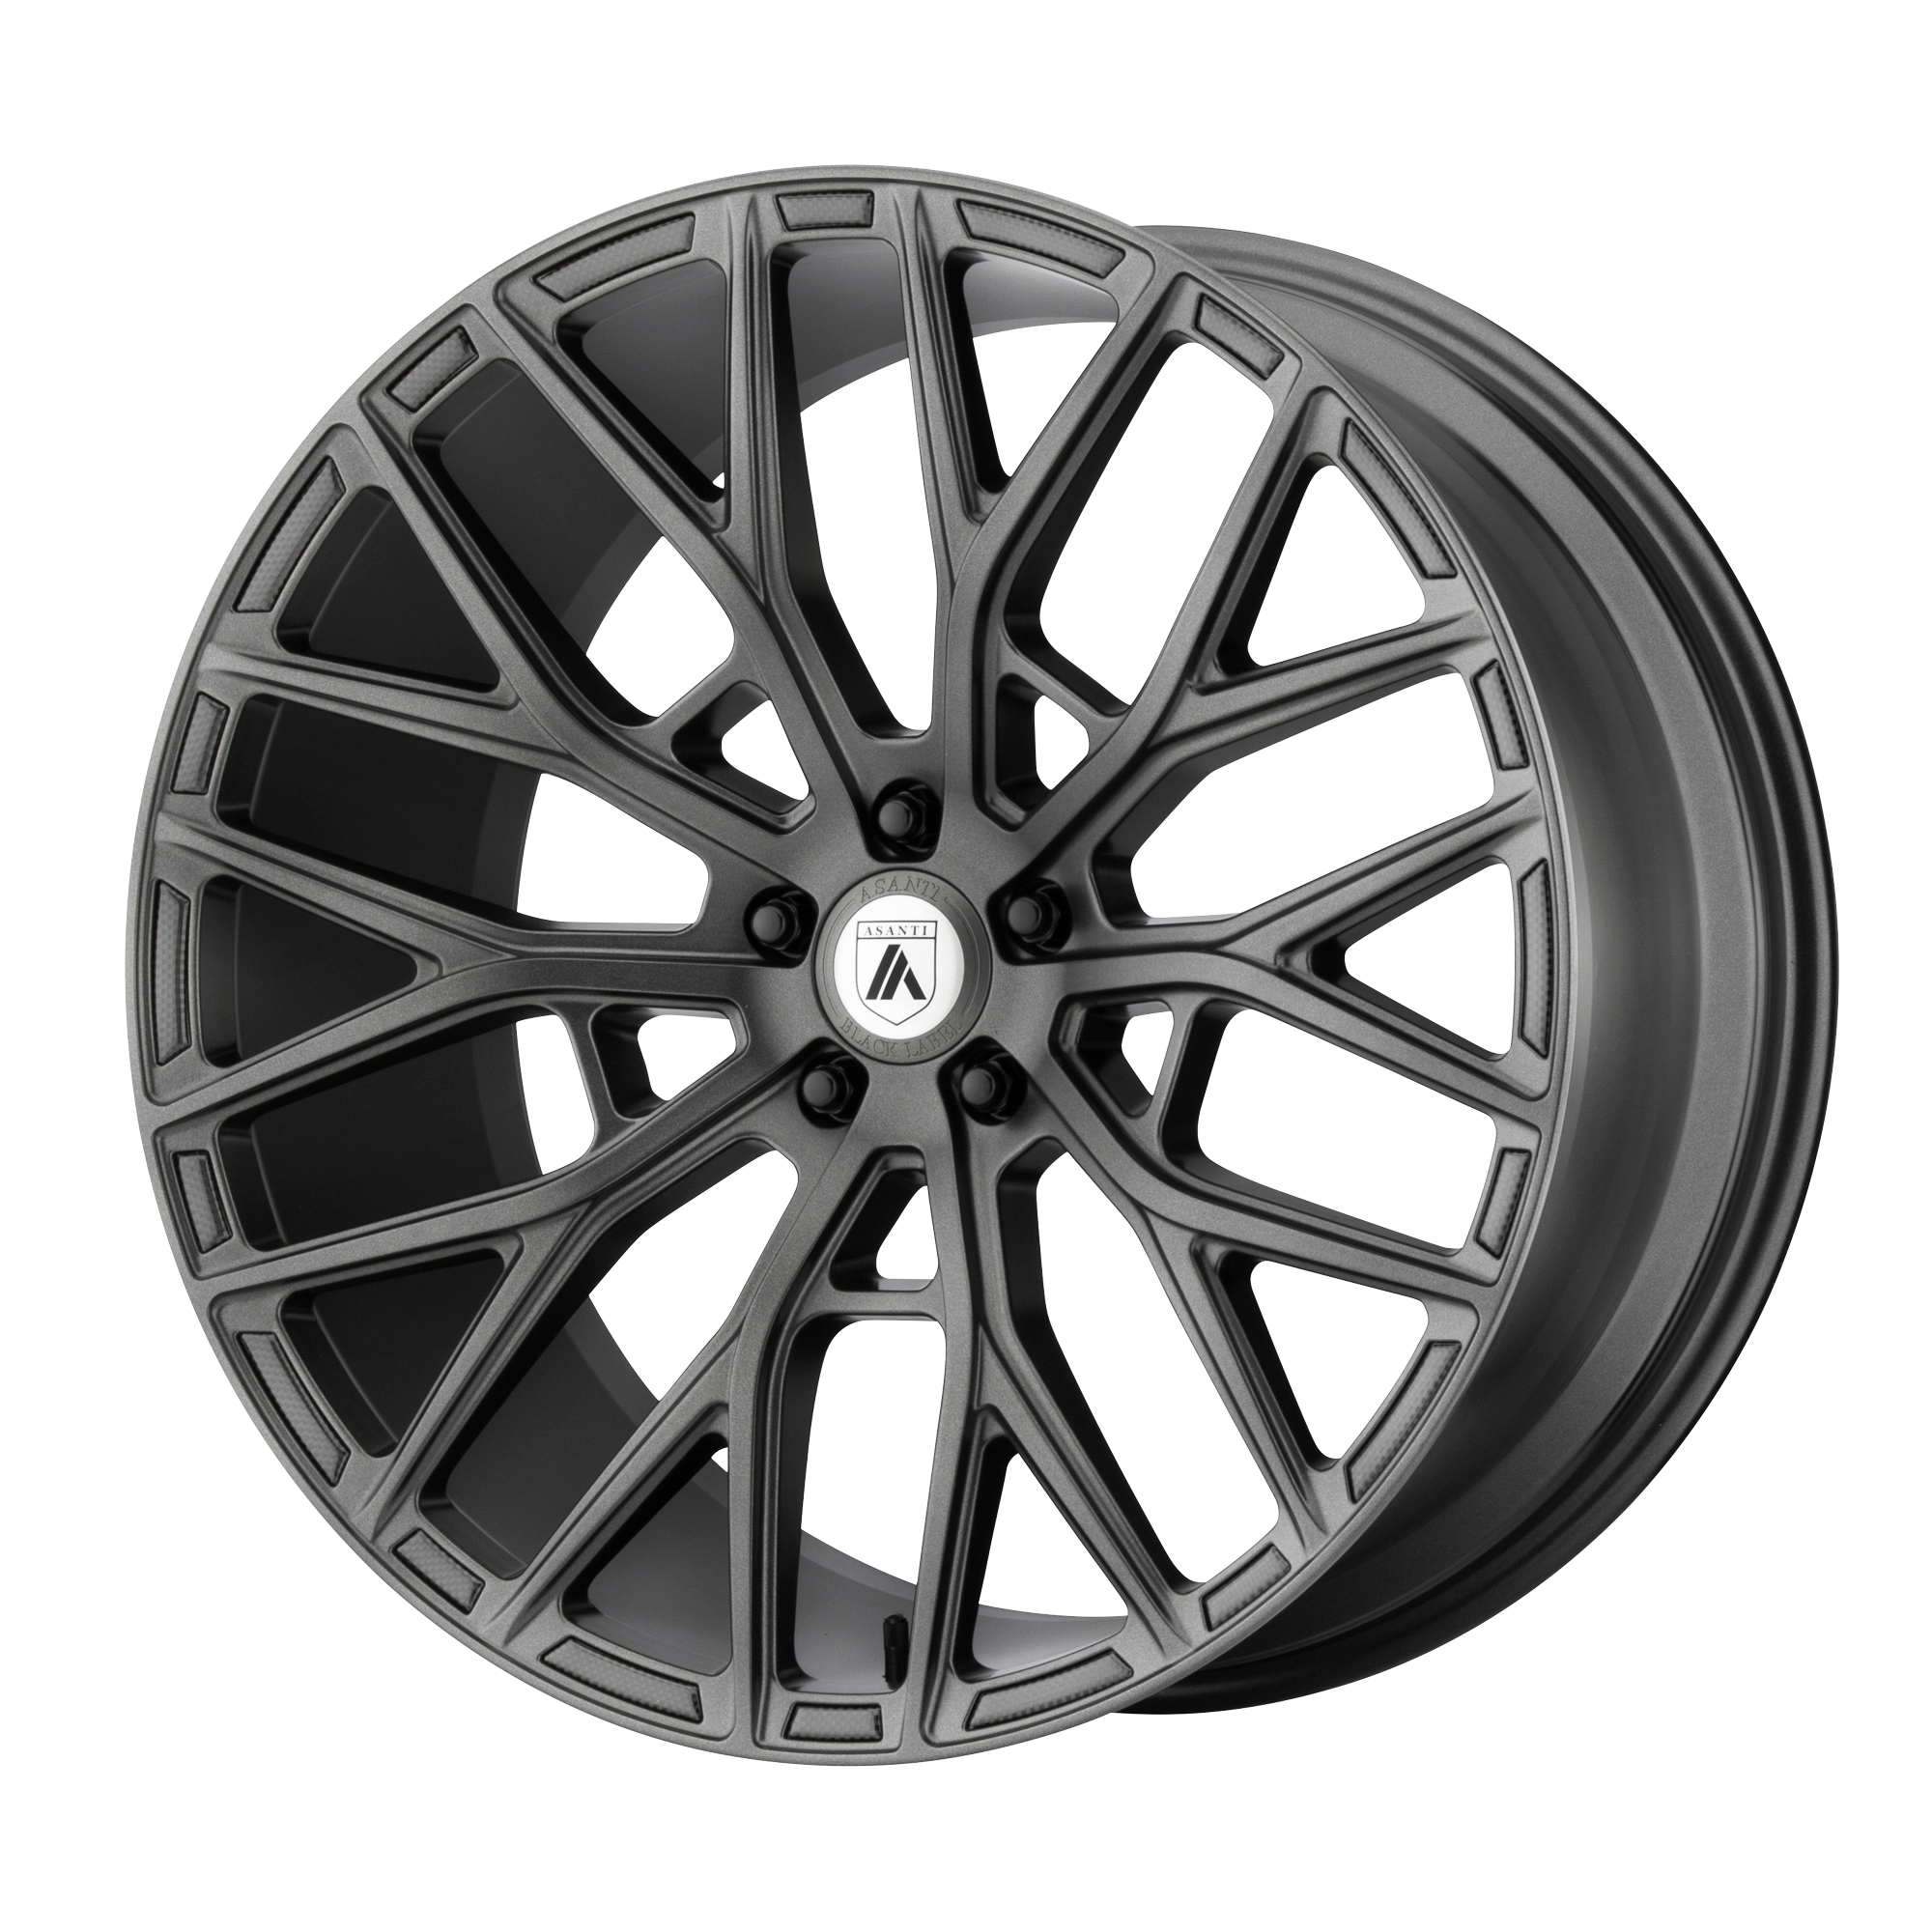 LEO 20x8.5 5x112.00 MATTE GRAPHITE (38 mm) - Tires and Engine Performance